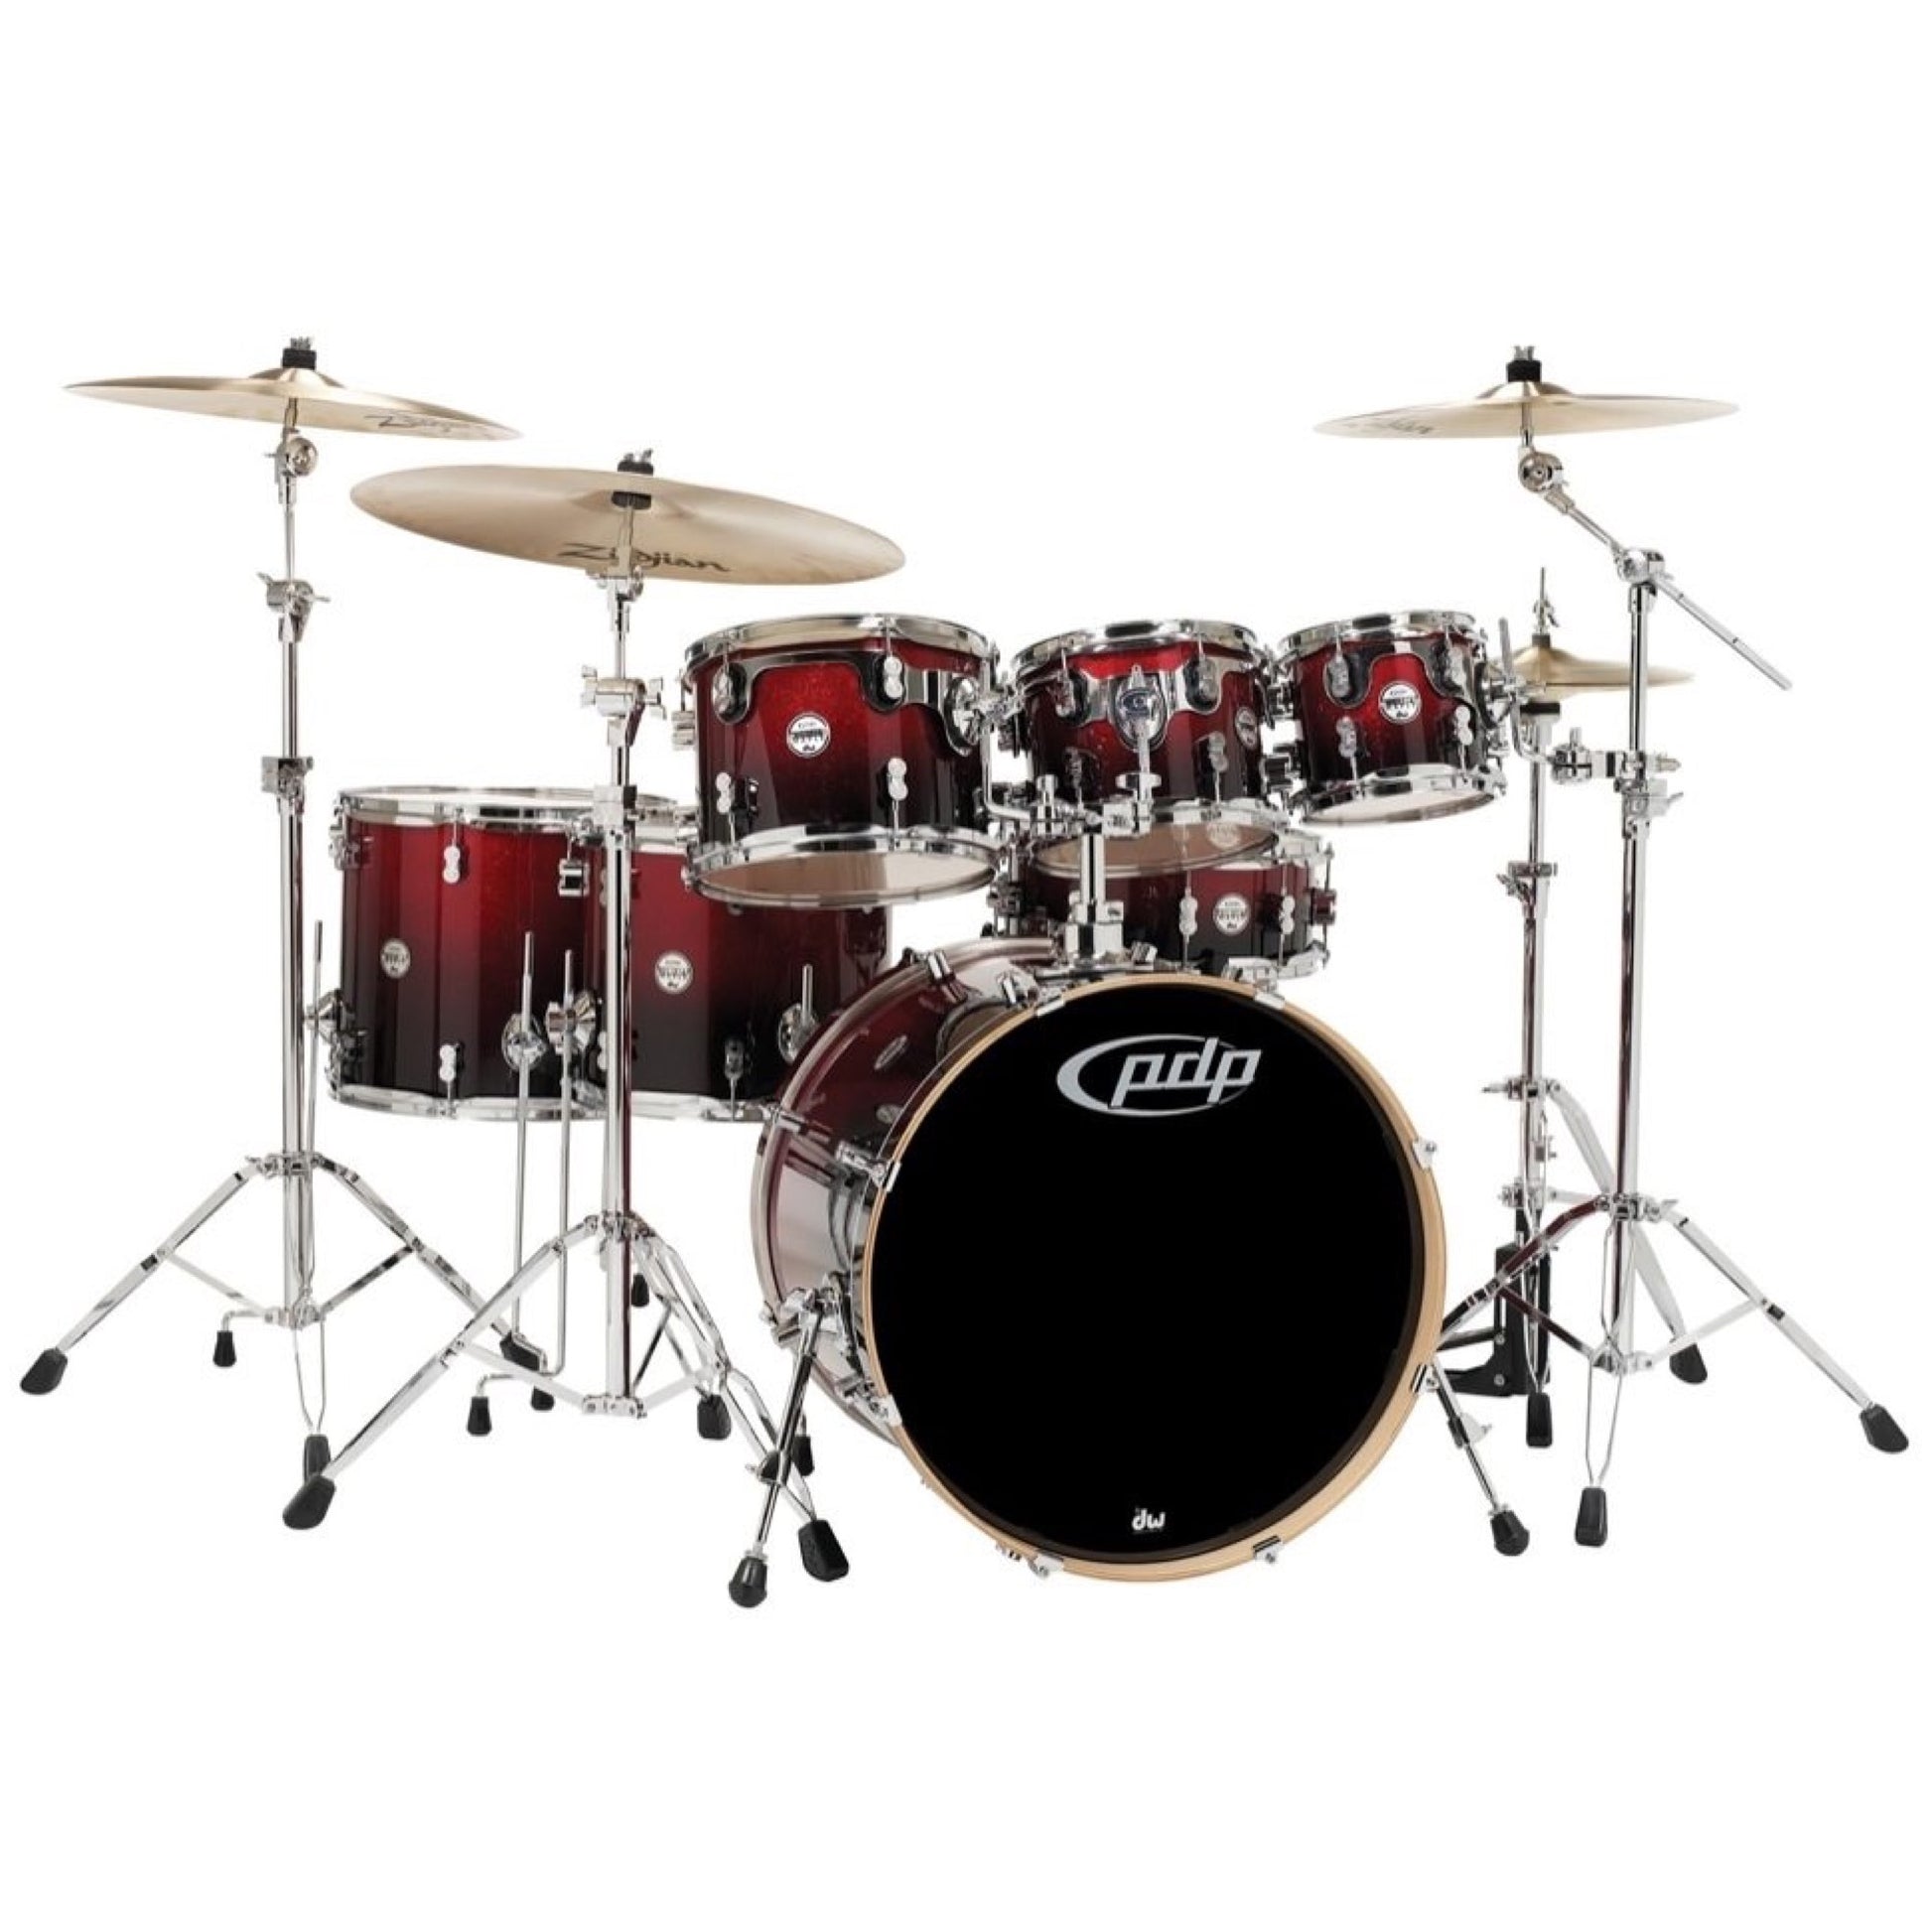 Pacific Drums Concept Maple Drum Shell Kit, 7-Piece, Cherry to Black Sparkle Fade